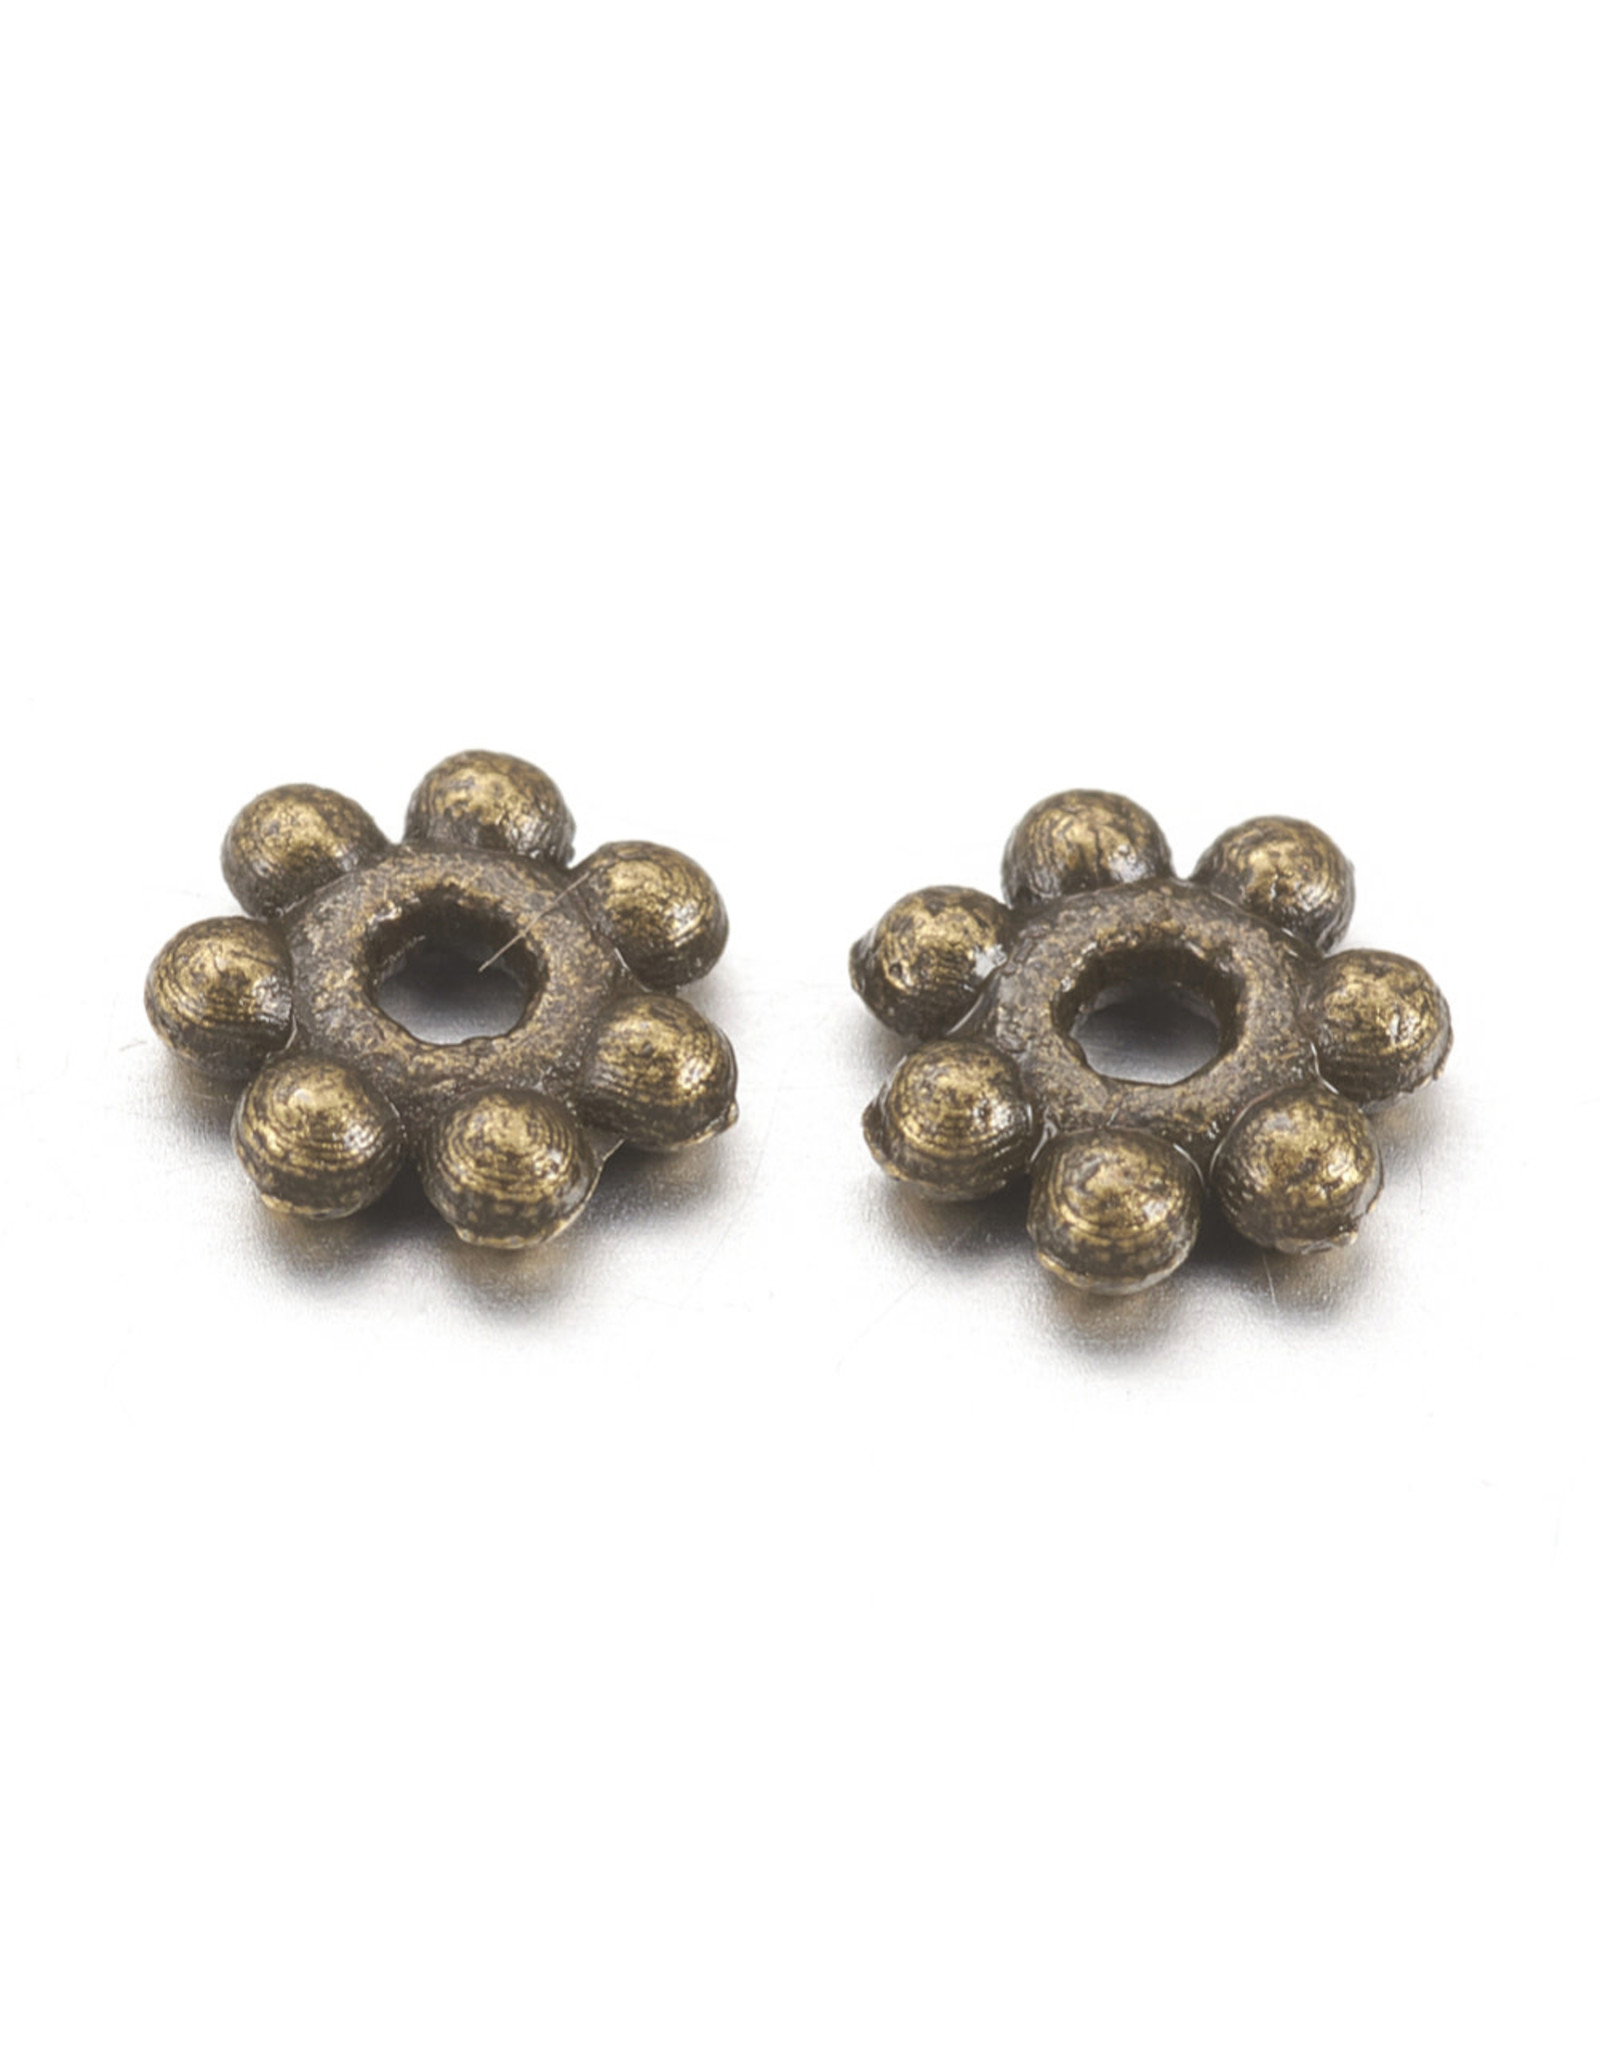 Daisy Spacer Bead Antique Brass 4mm x100 NF